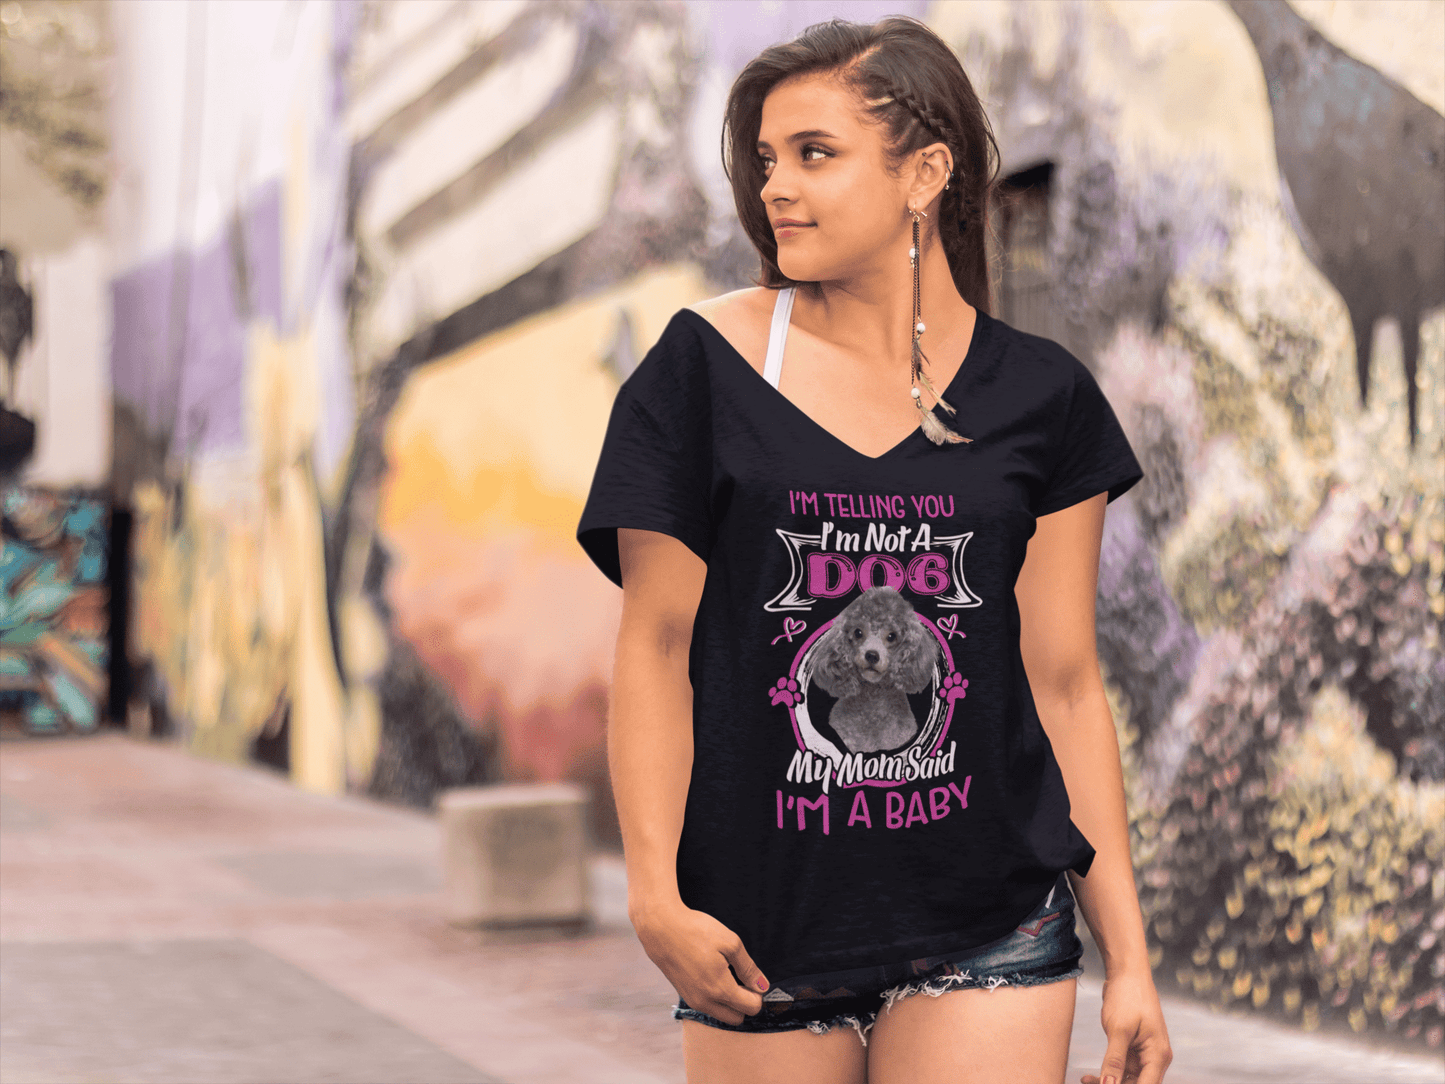 ULTRABASIC Women's T-Shirt I'm Telling You I'm Not a Poodle - My Mom Said I'm a Baby - Cute Puppy Dog Lover Tee Shirt